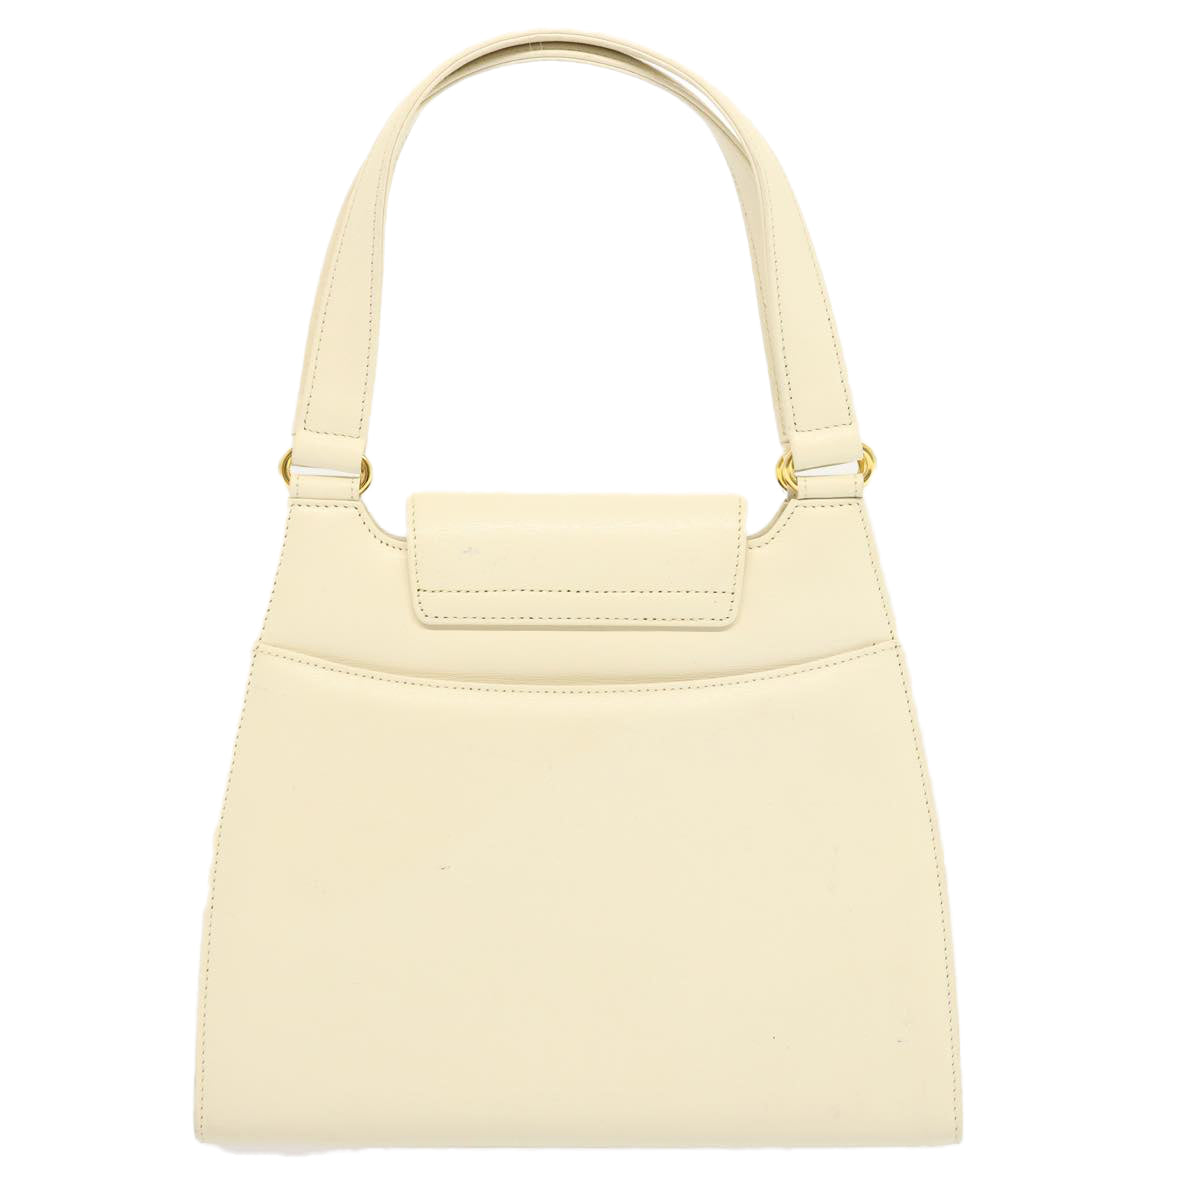 GIVENCHY Hand Bag Leather White Auth bs13388 - 0